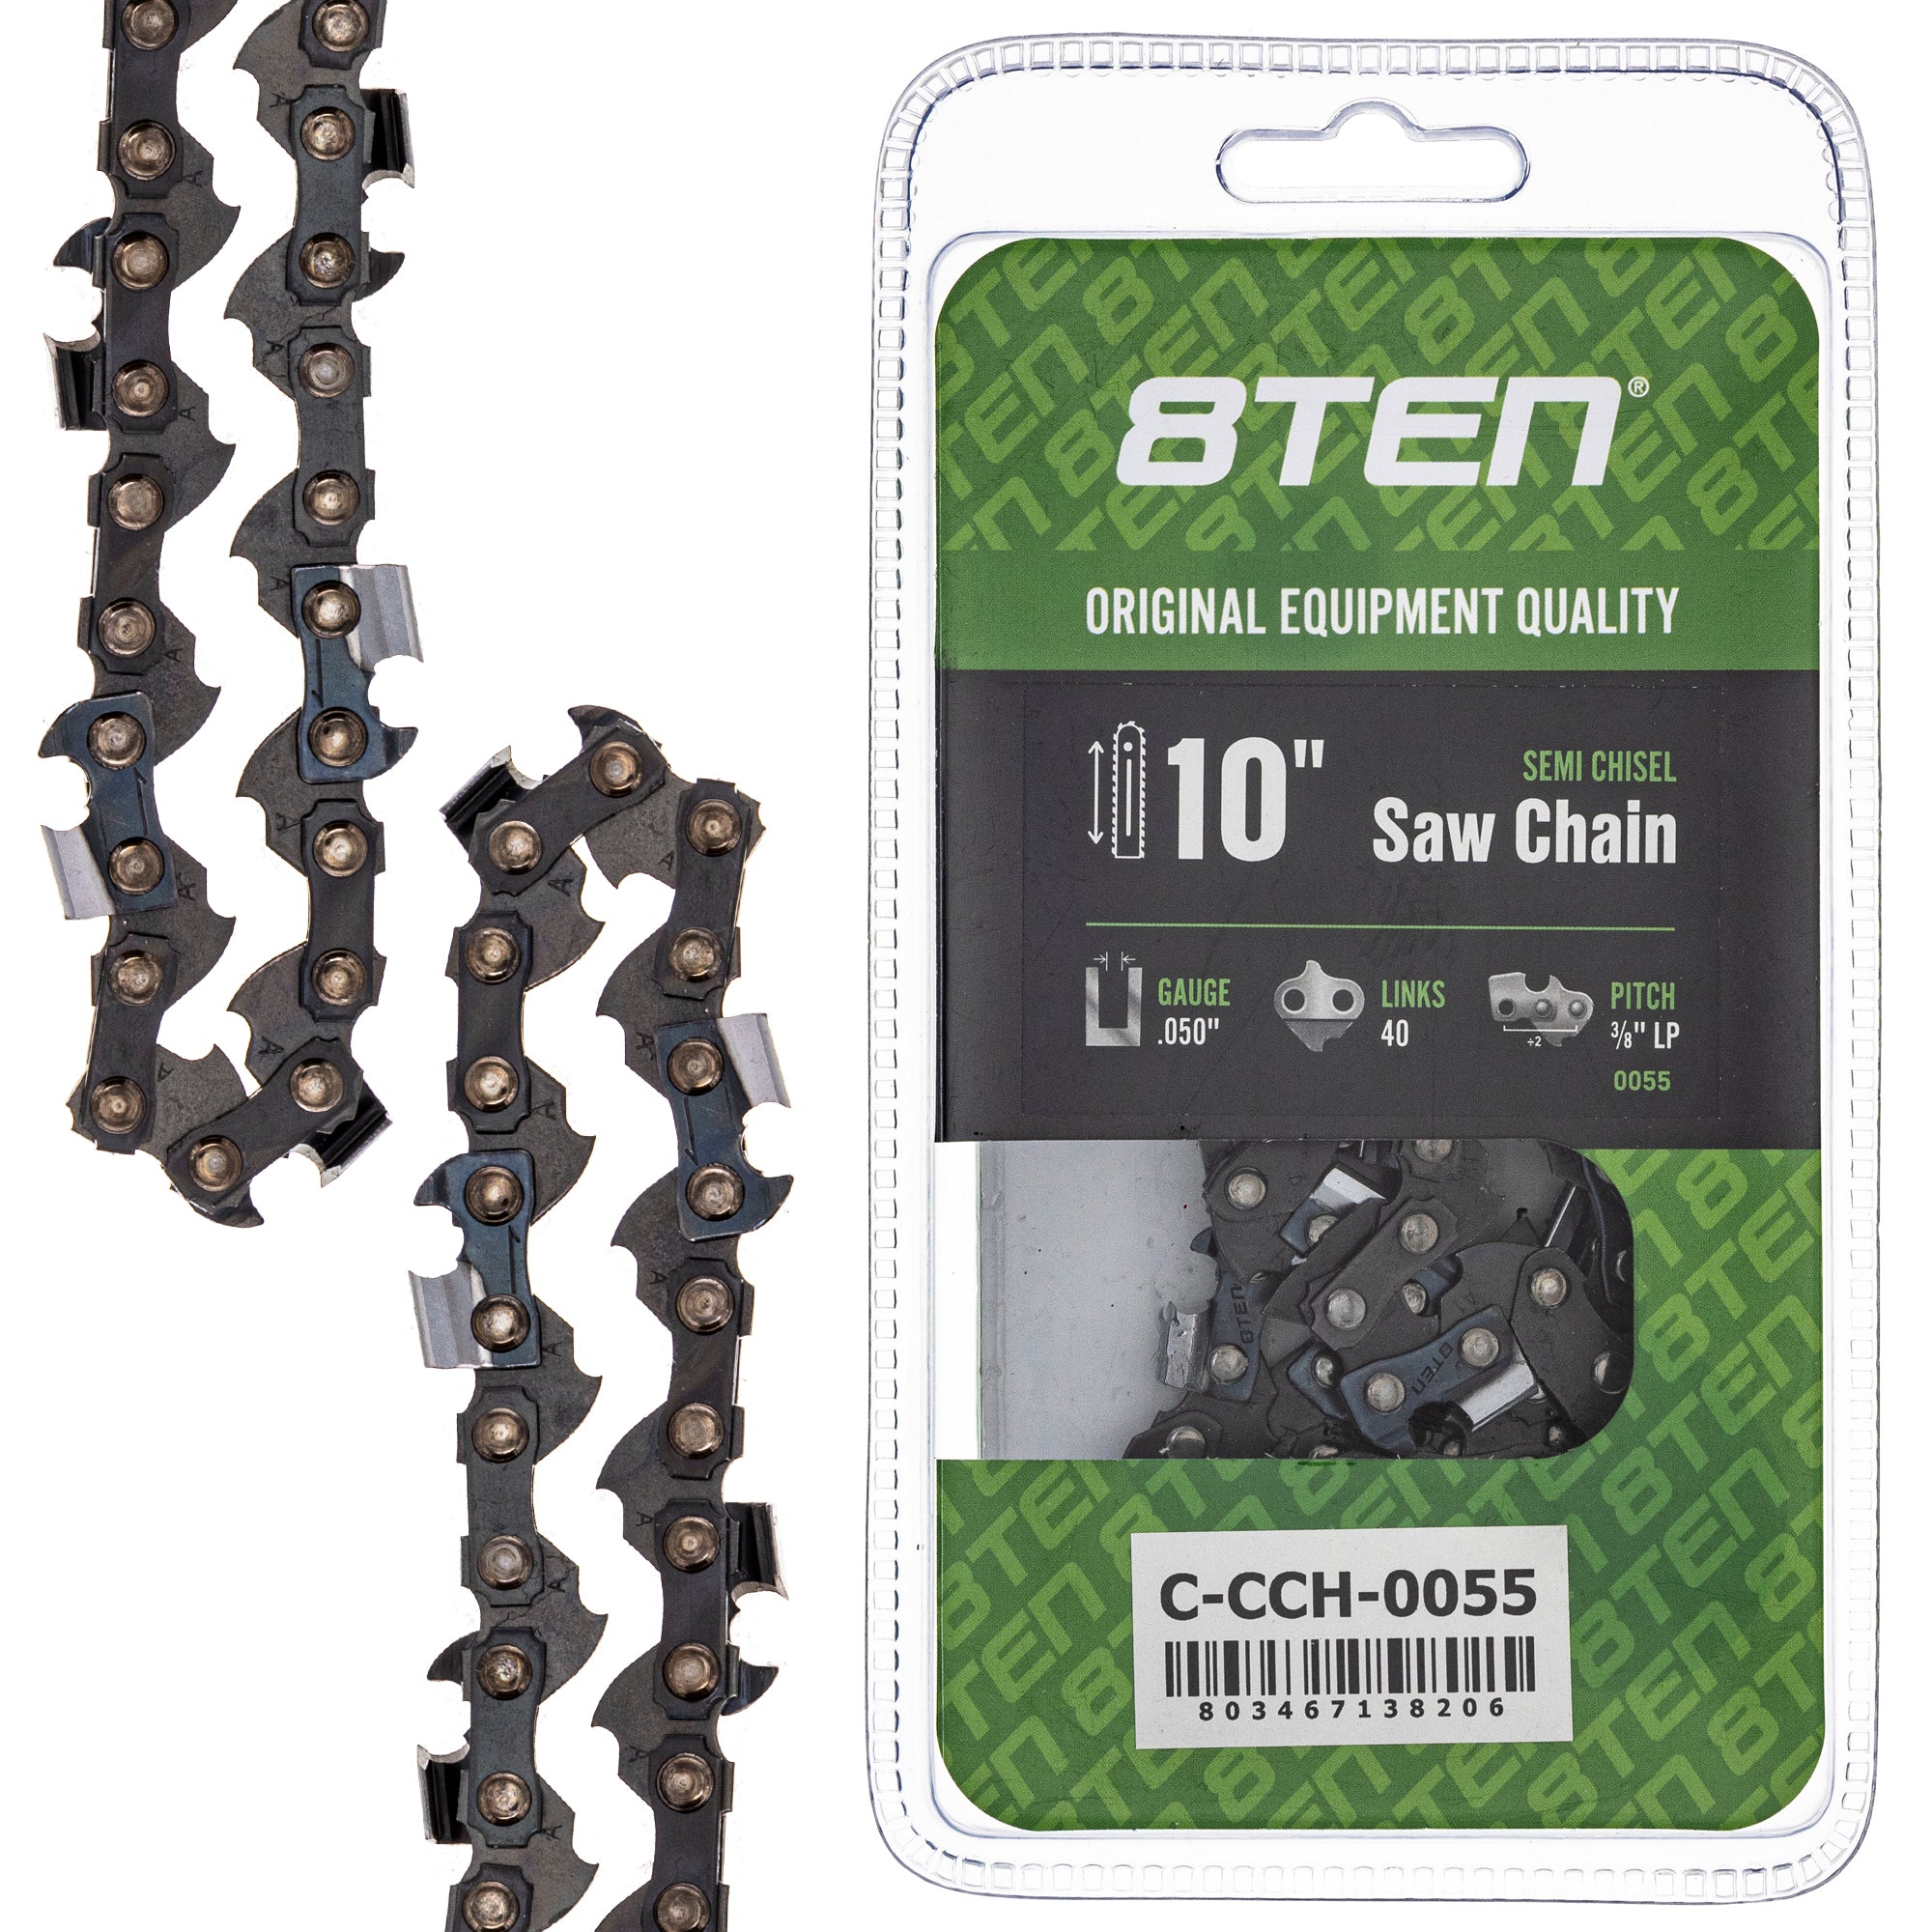 Chainsaw Chain 10 Inch .050 3/8 LP 40DL for zOTHER Oregon WG309 RM8EPS RM1425 RM1415U 8TEN 810-CCC2277H